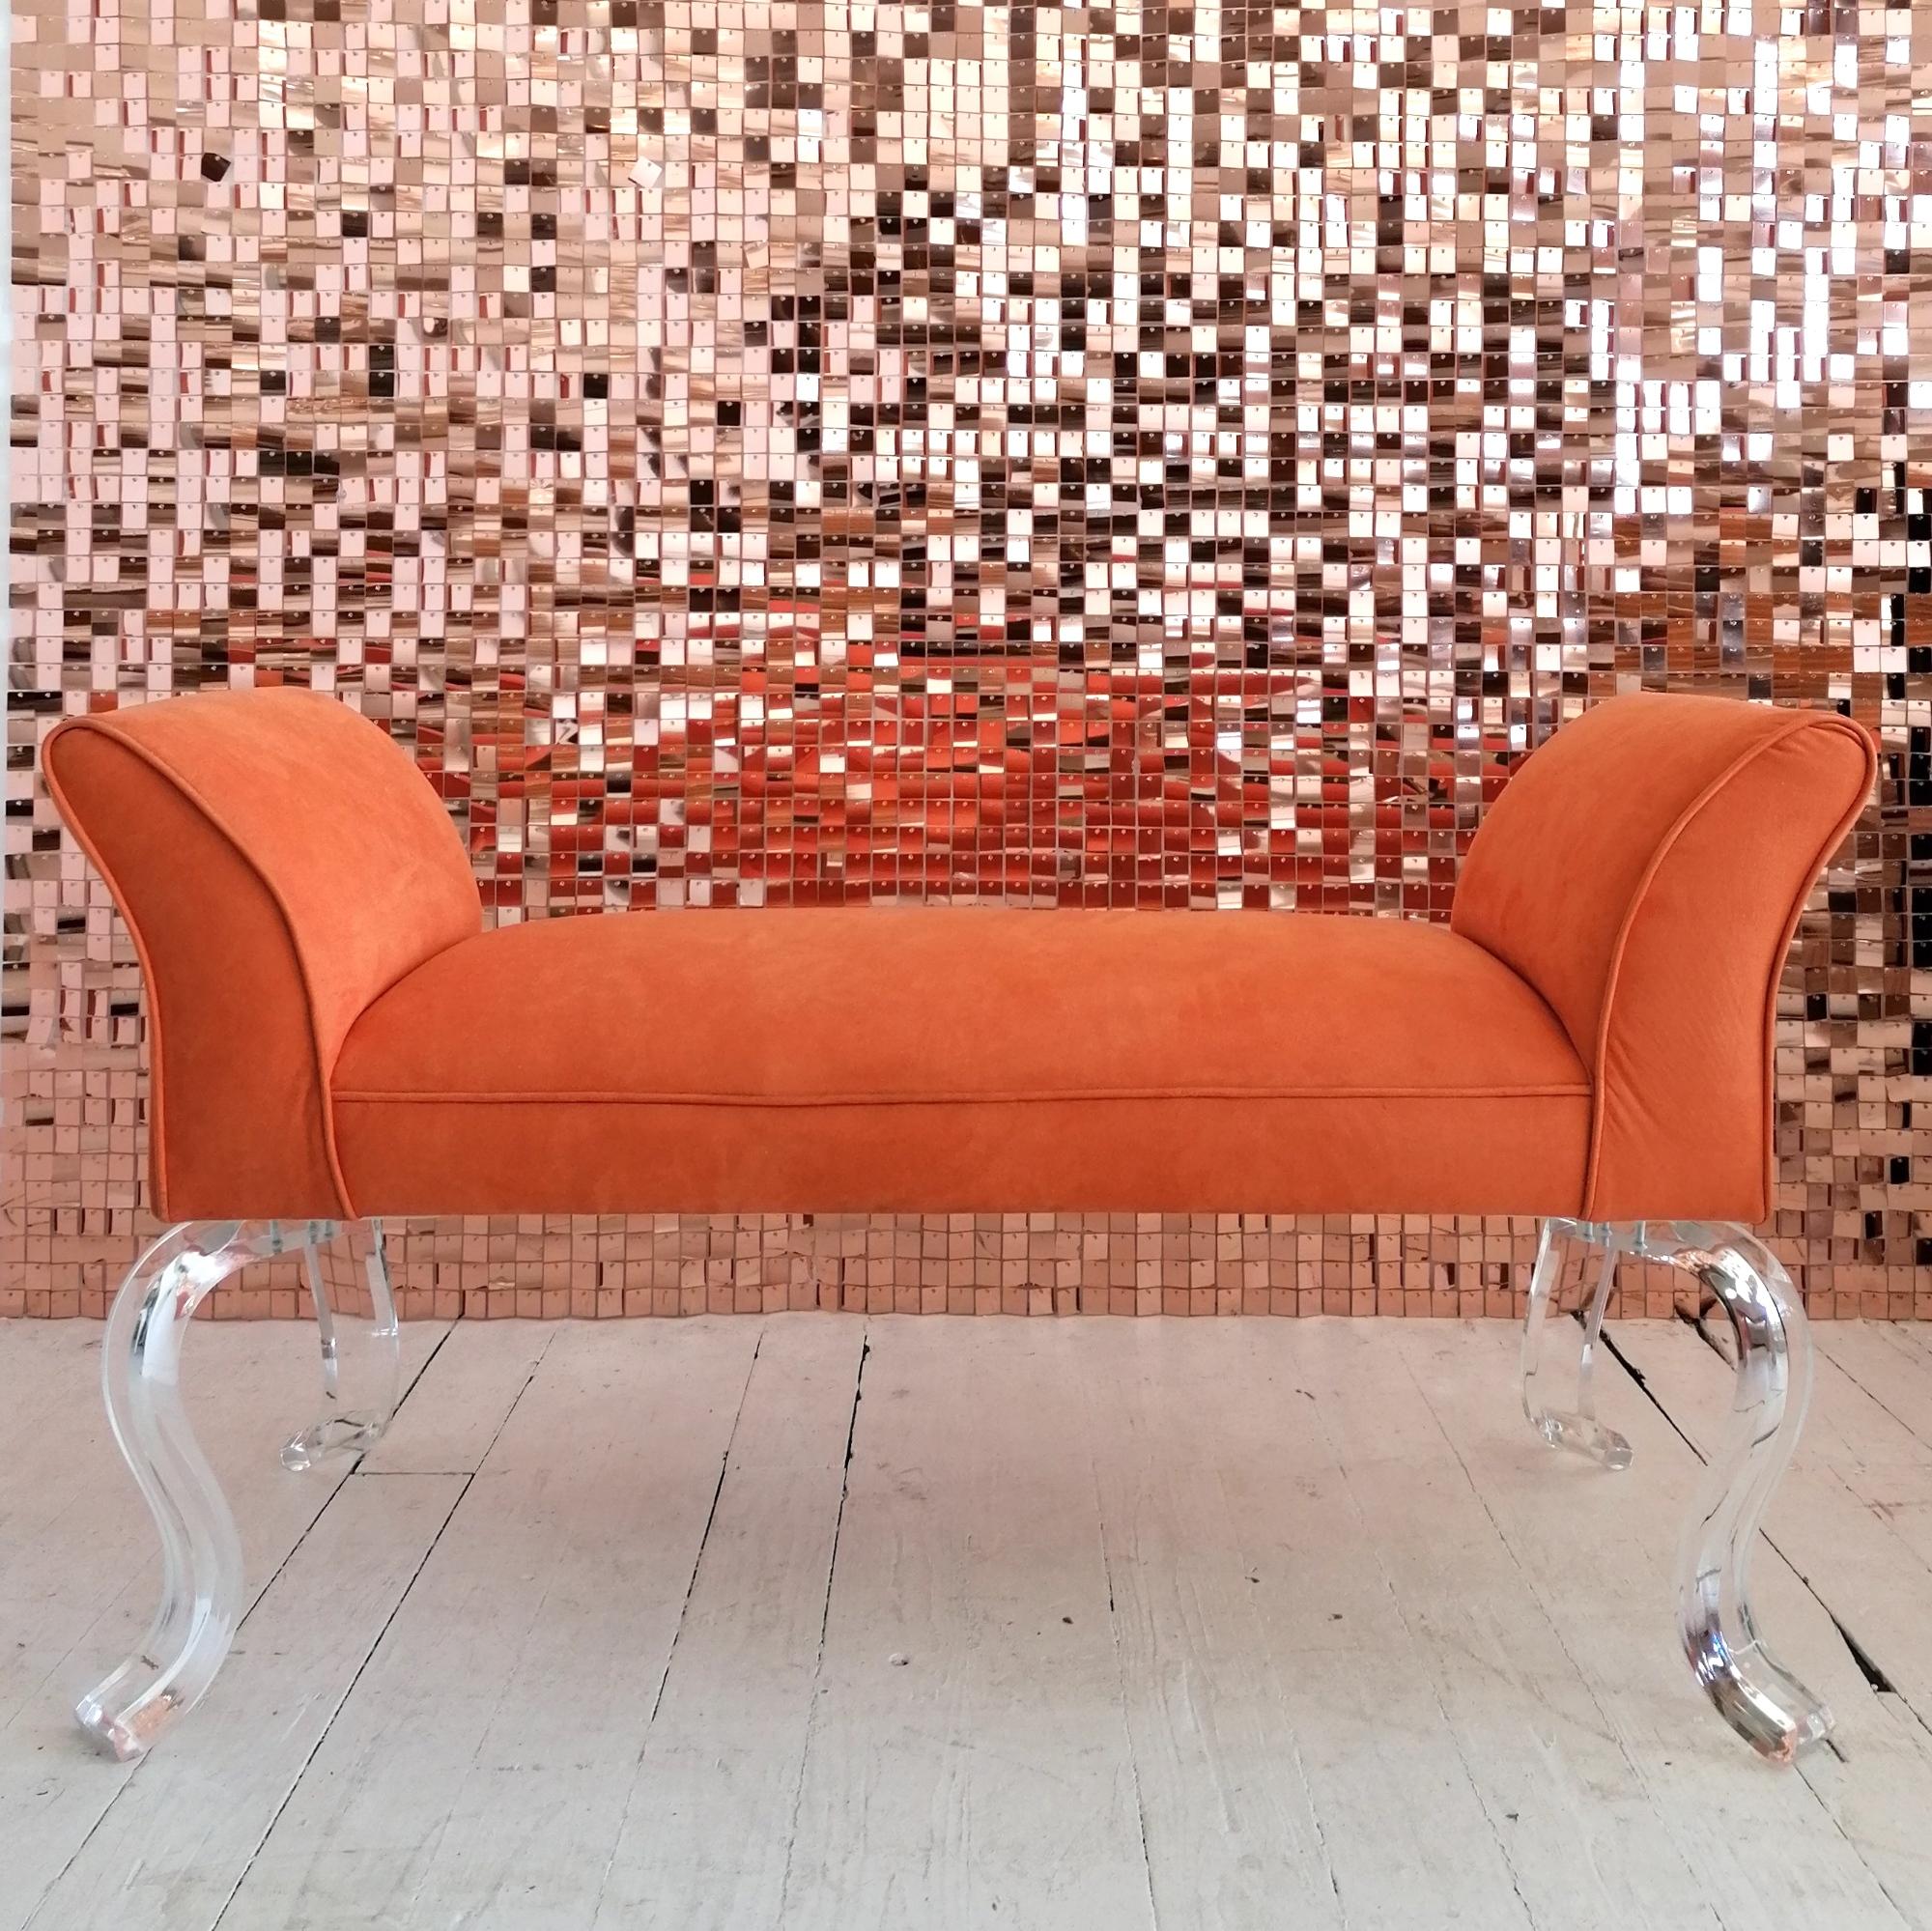 Large vintage double-ended bench by Shlomi Haziza, USA c1980s. 
Curvy lucite legs, light orange ultrasuede upholstery, in excellent condition.
Labelled on leg.
Legs can be easily removed for transport.

Dimensions: width 130cm, depth 59cm, height